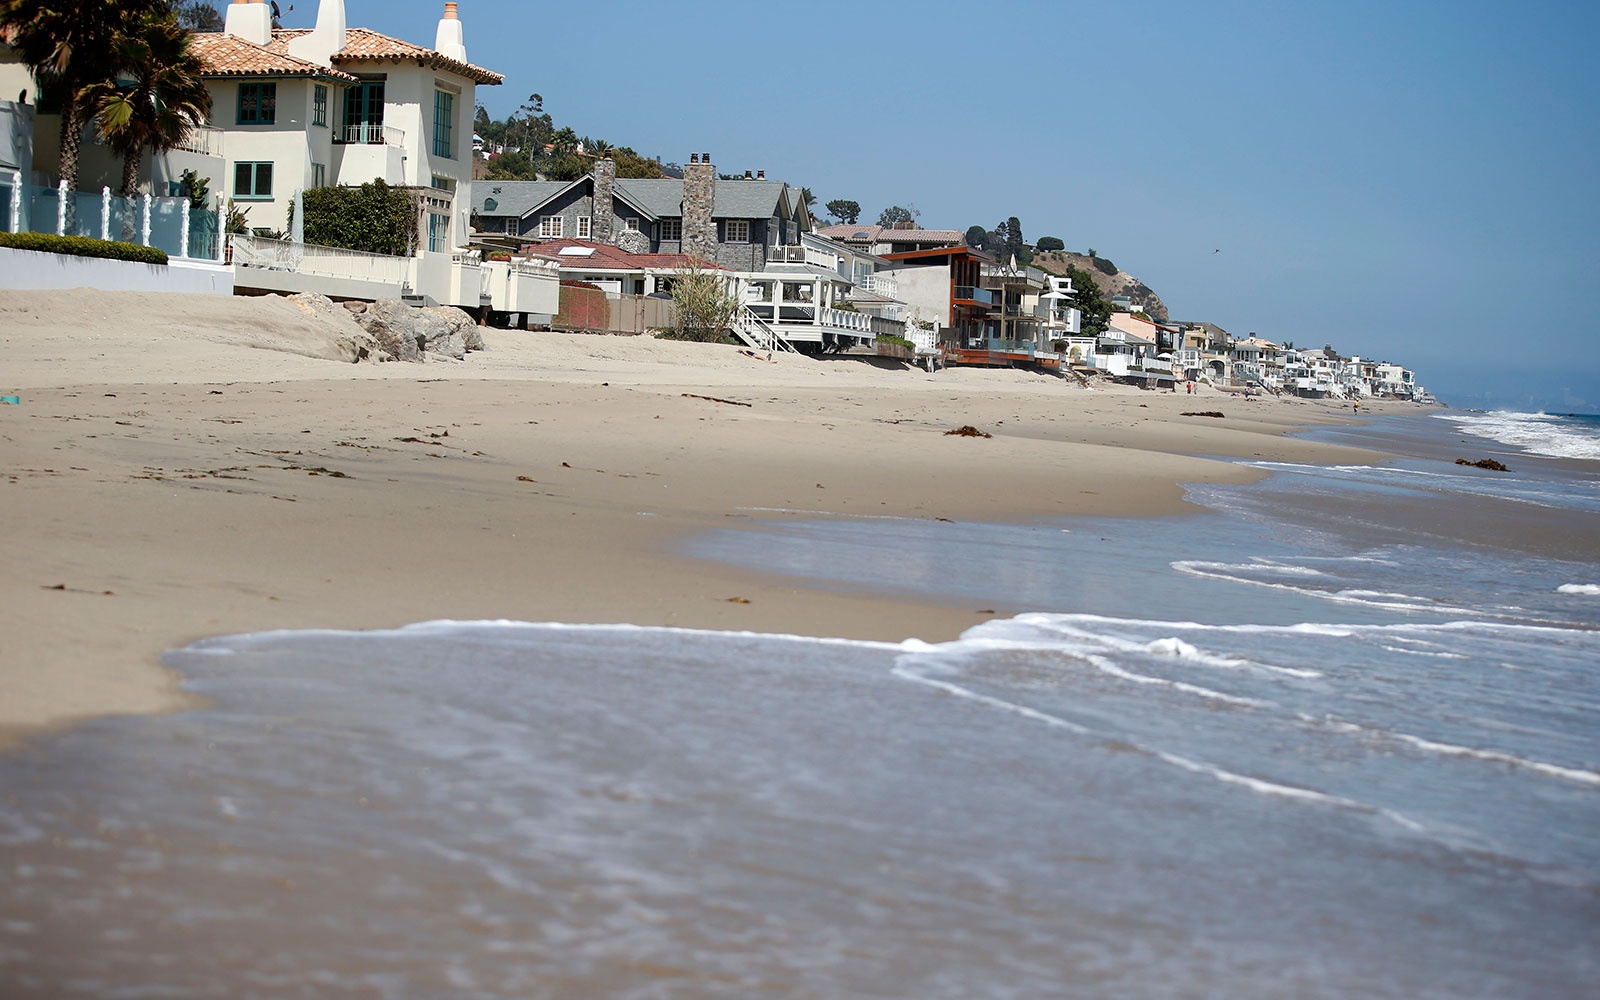 It's Easier for Non-Billionaires To Visit Billionaire Beach, Thanks to a New Pathway